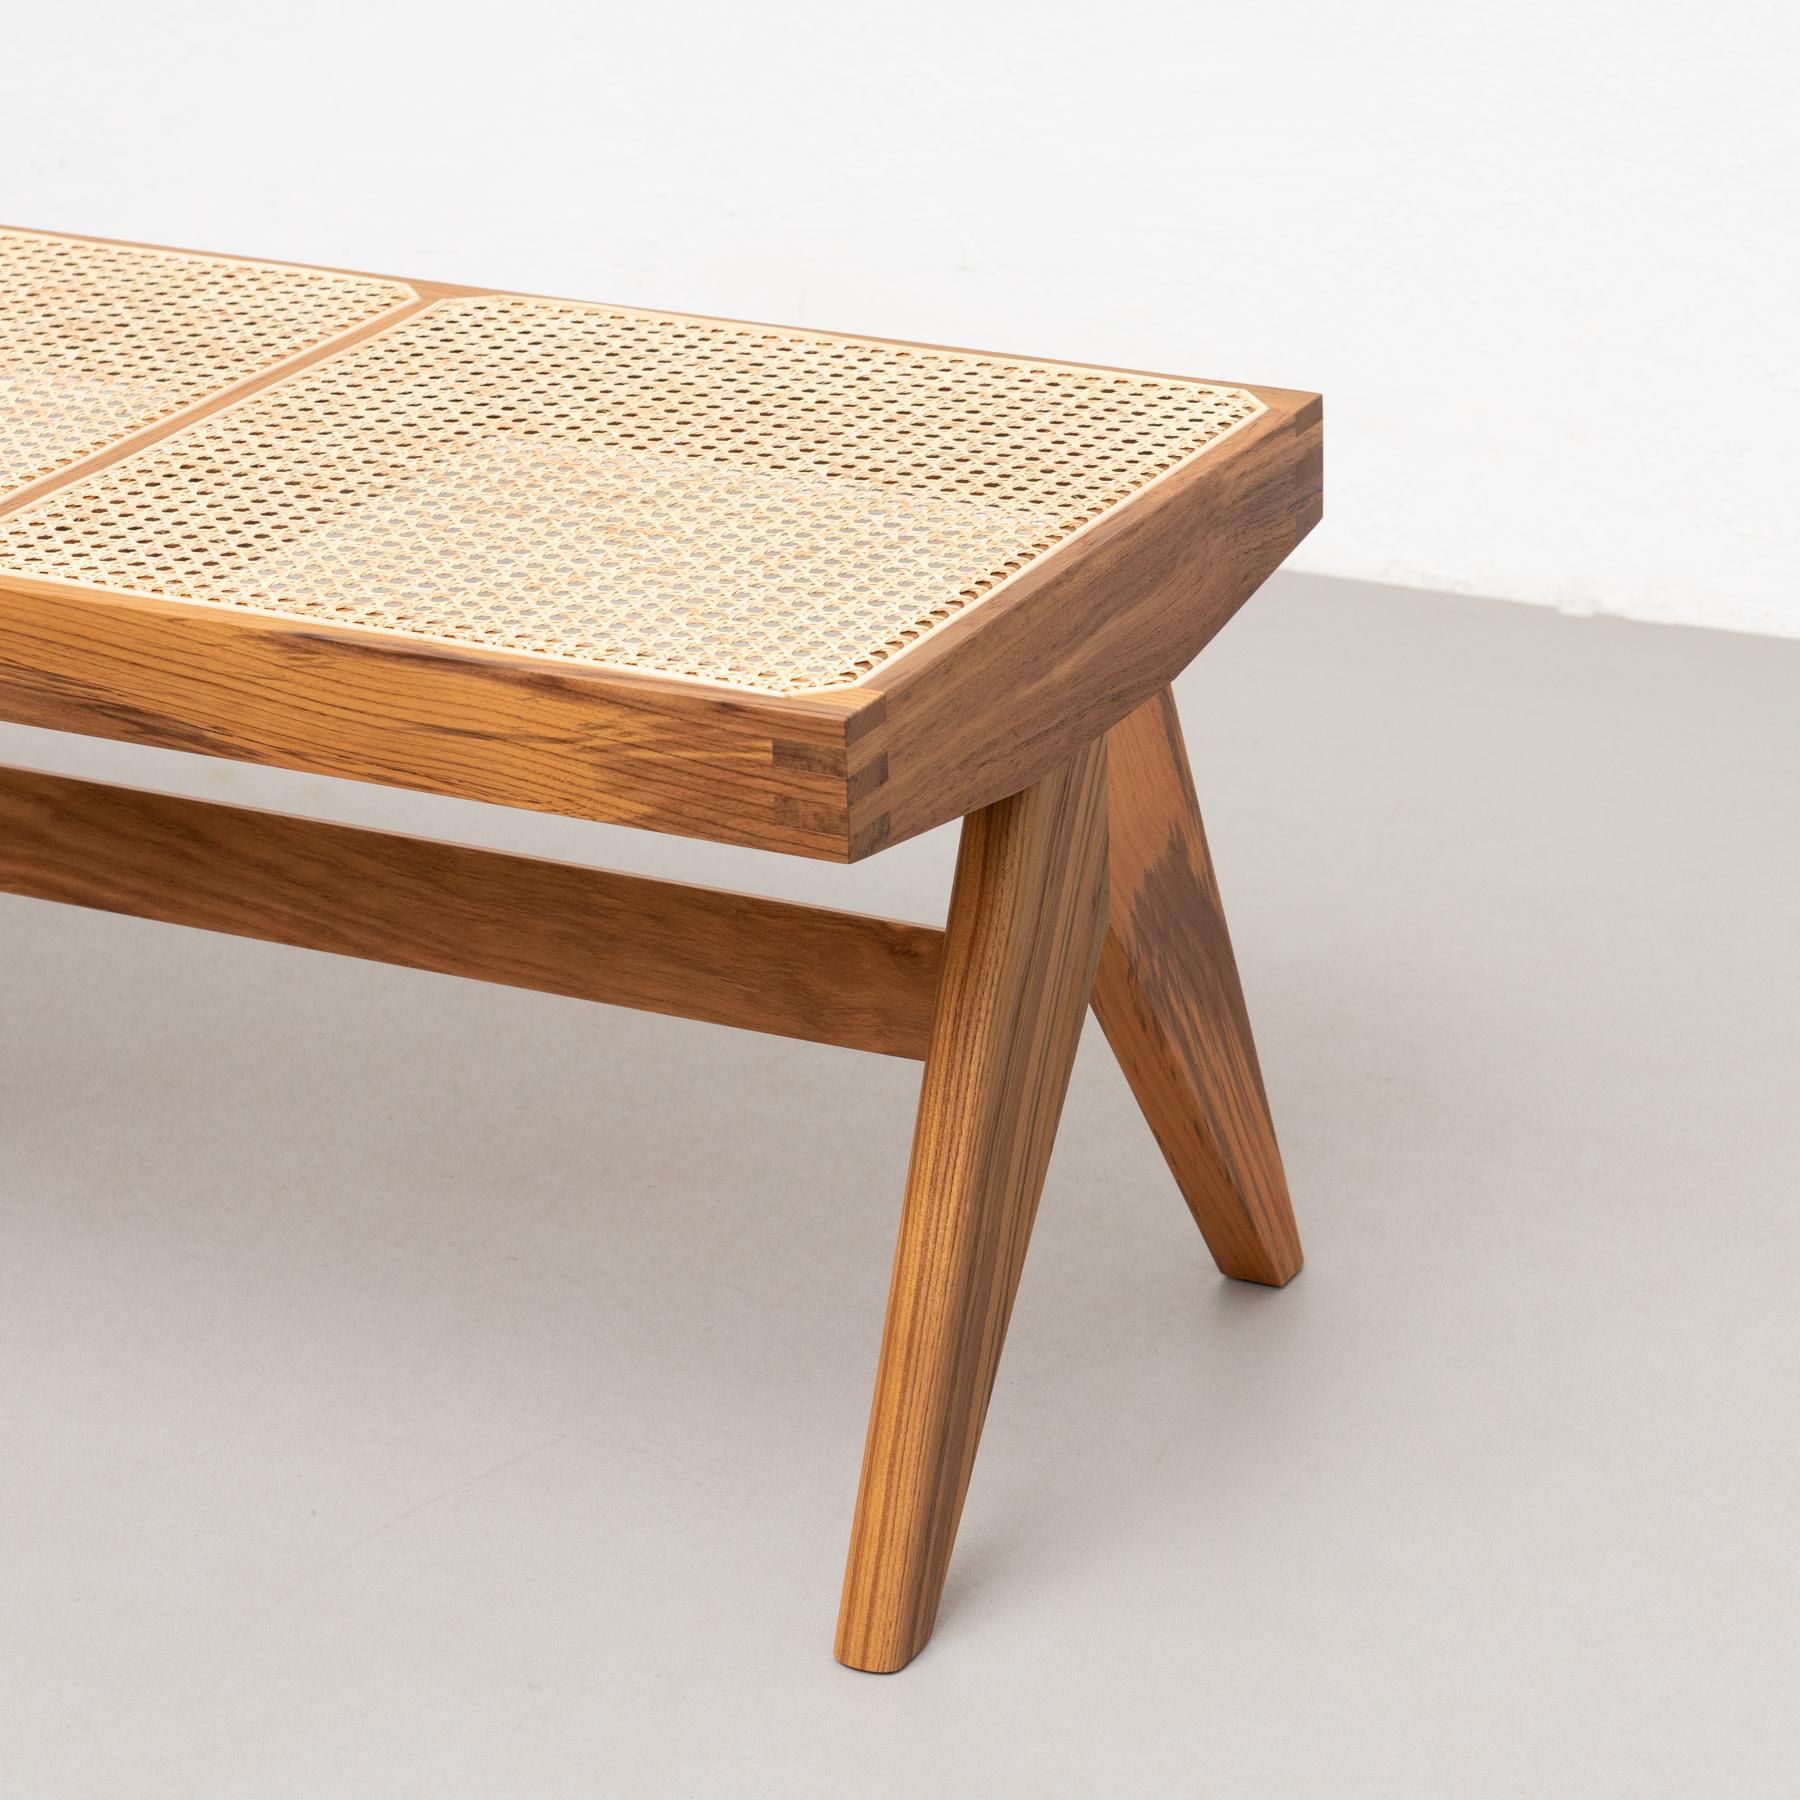 Pierre Jeanneret 057 Civil Bench, Wood and Woven Viennese Cane For Sale 3